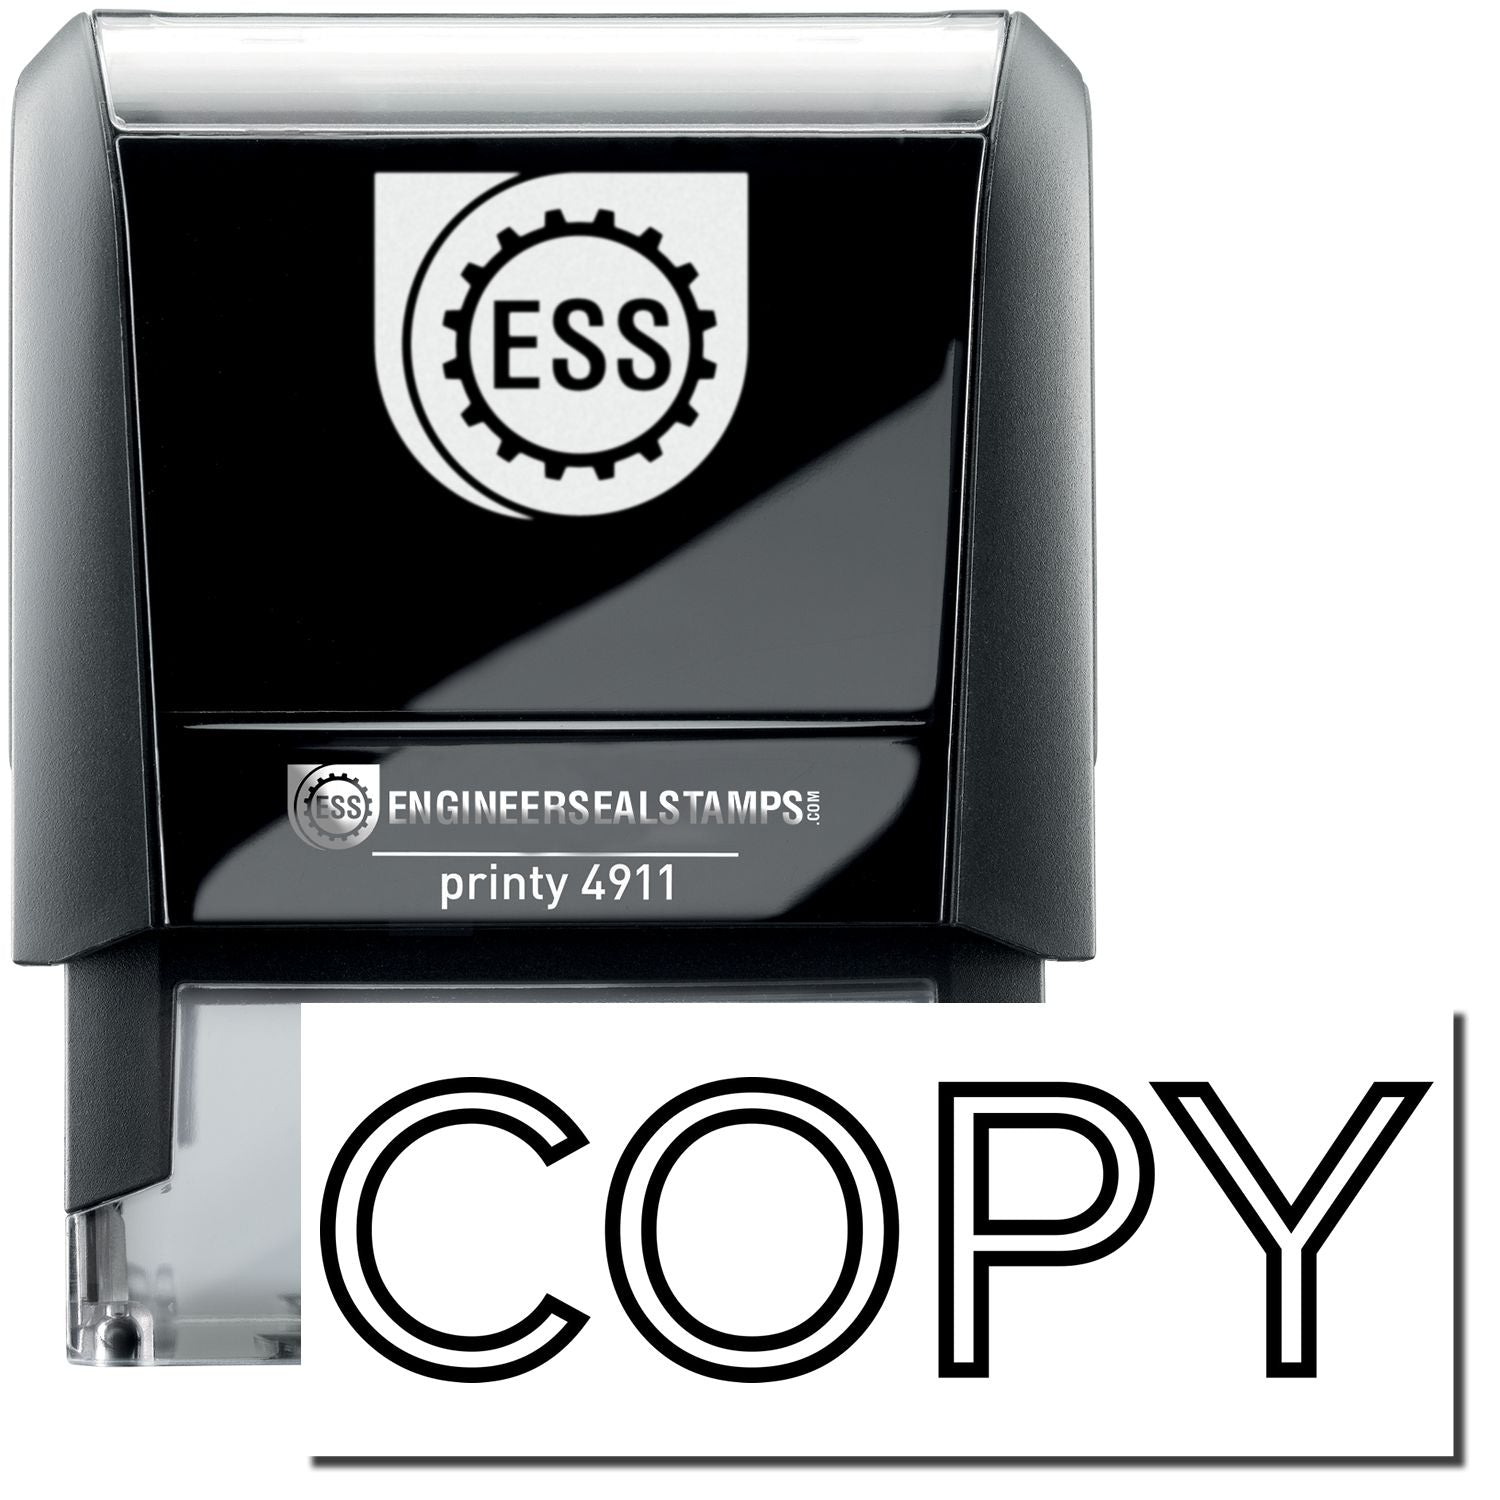 A self-inking stamp with a stamped image showing how the text "COPY" in an outline font is displayed after stamping.